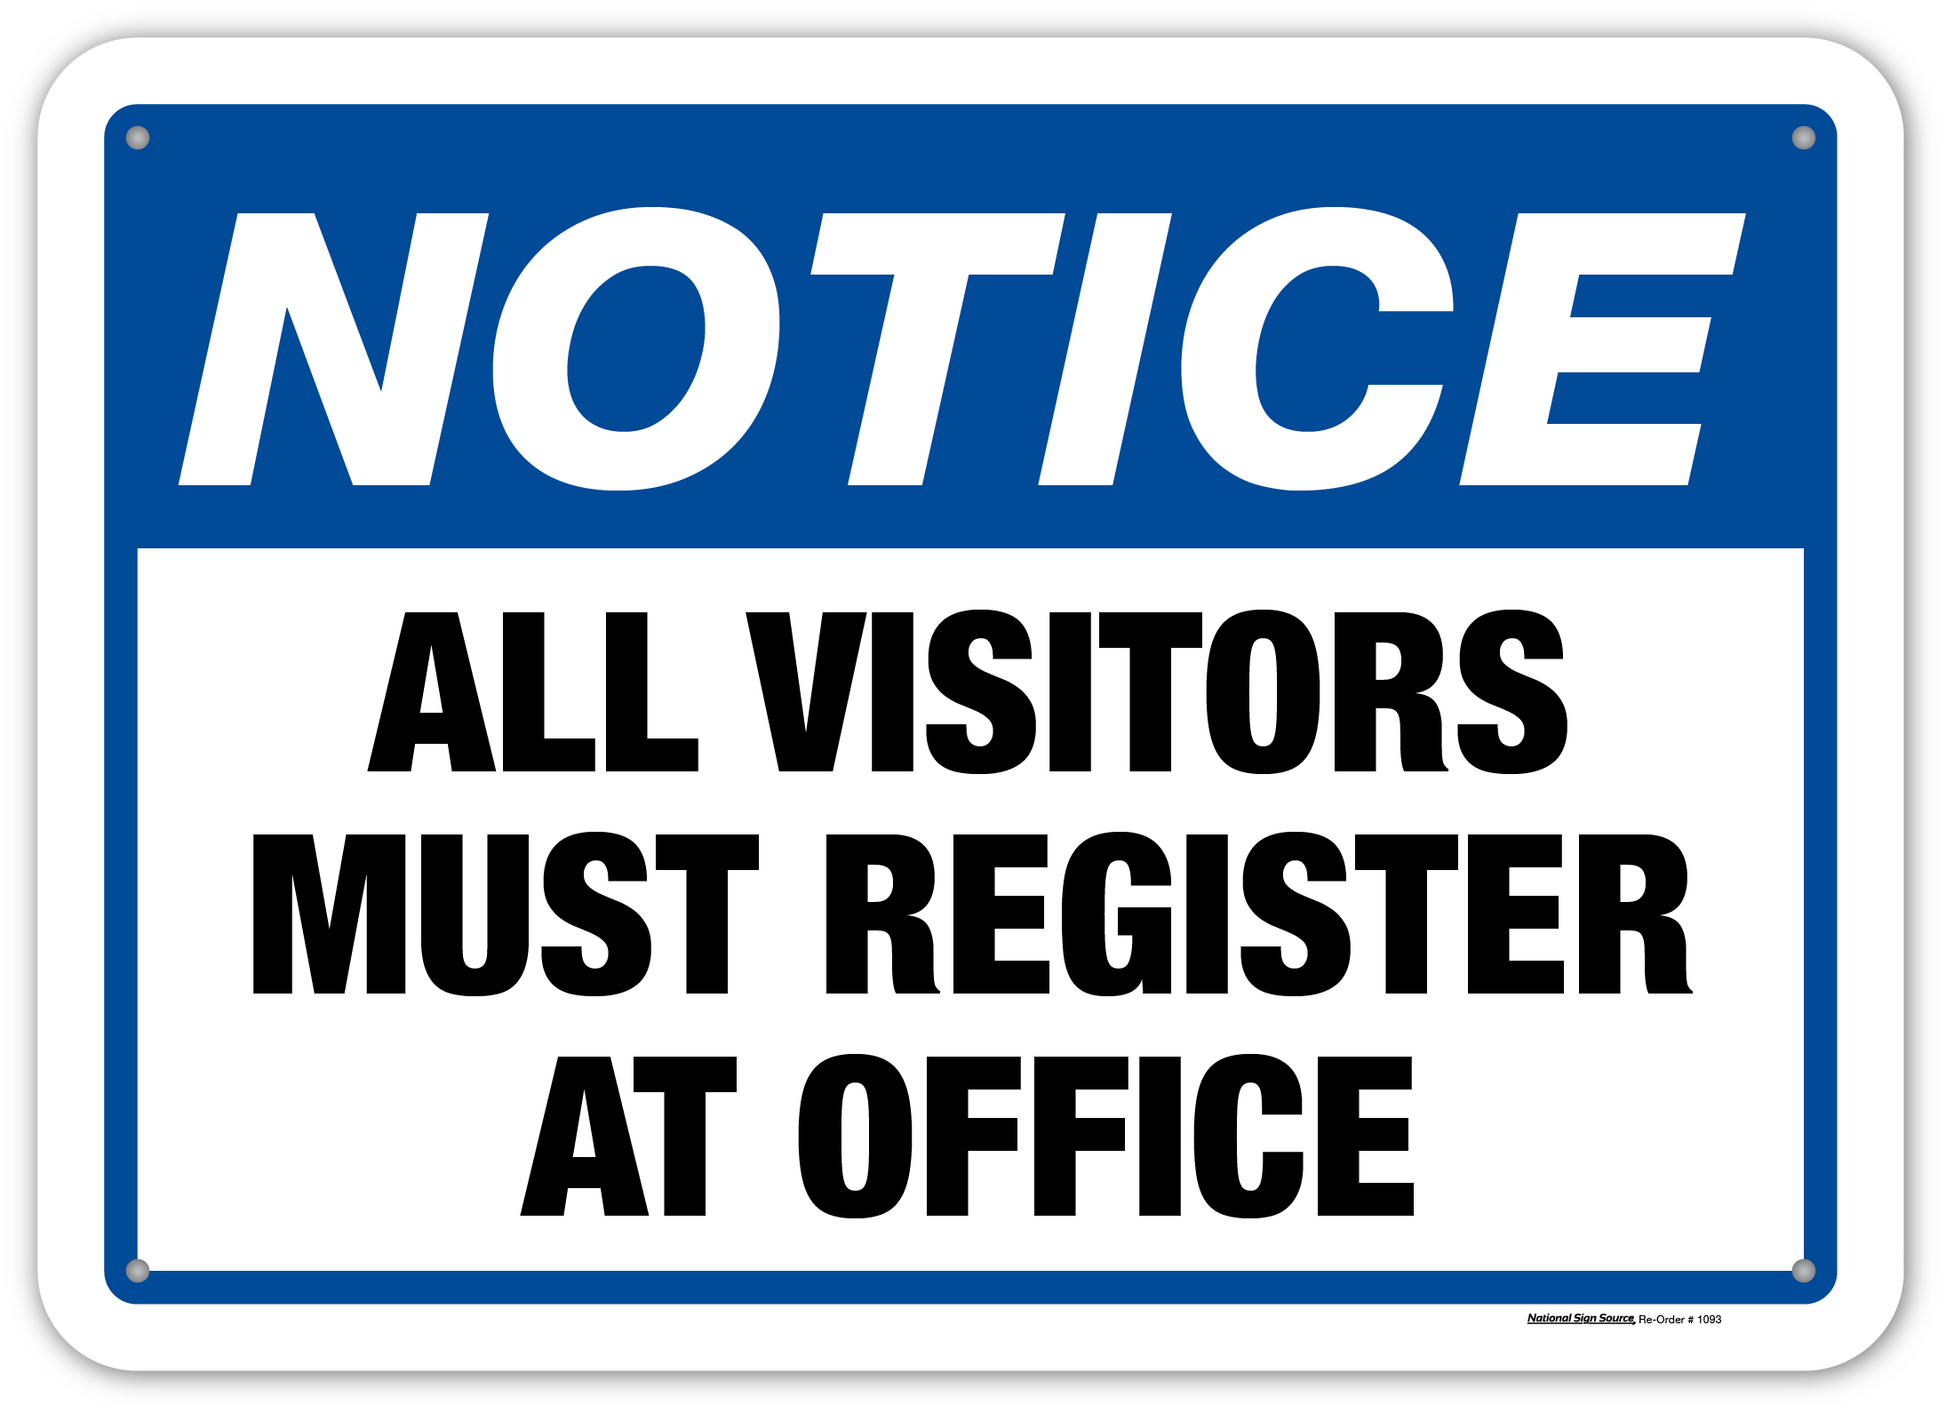 NOTICE, All Visitors must register at office sign.  Aluminum sign and vinyl signs.